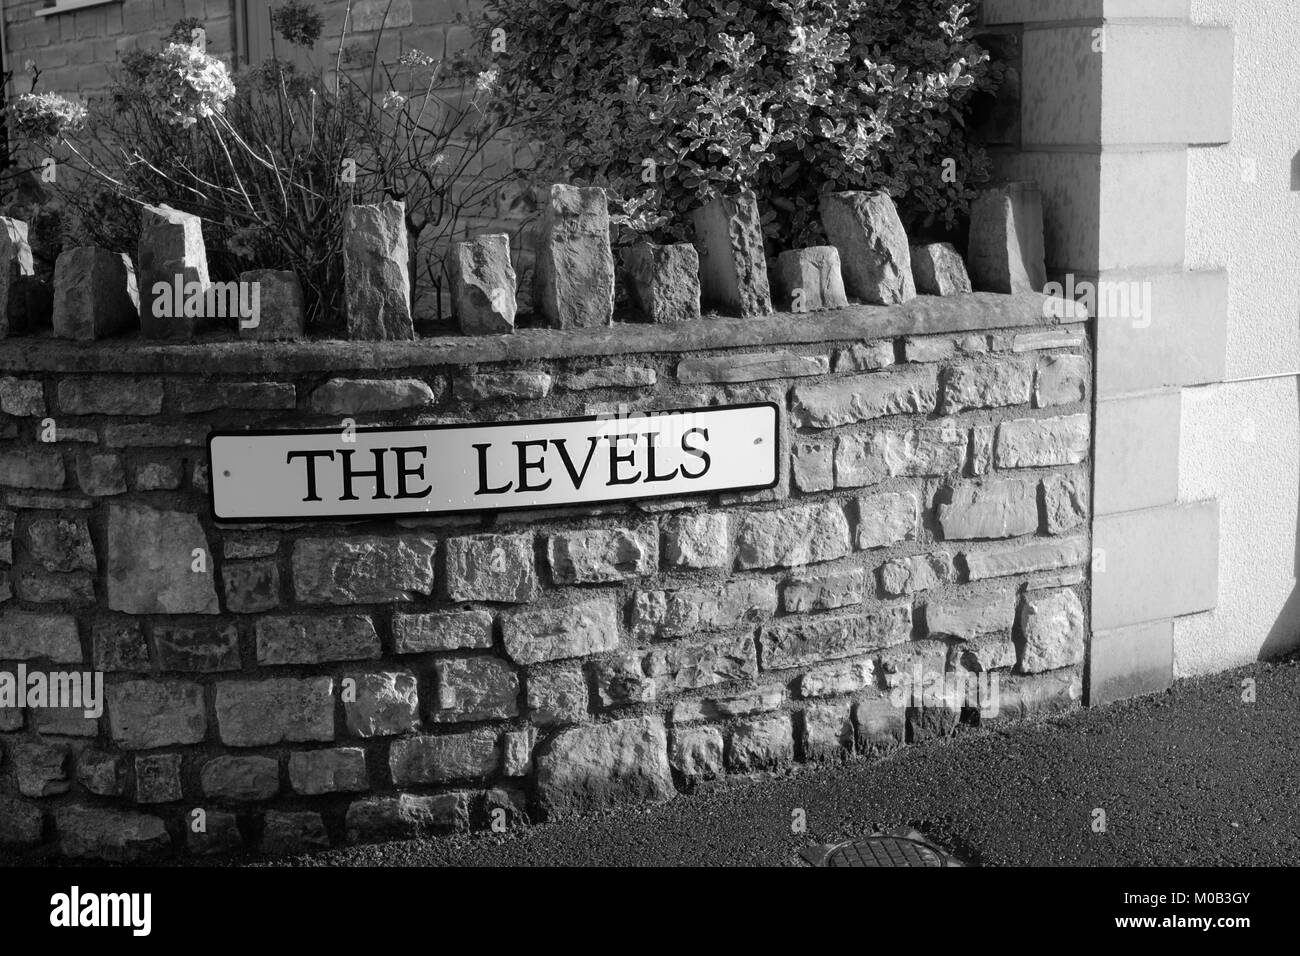 January 2018 - The levels, Street sign for a housing estate in Meare, Somerset, England. Stock Photo